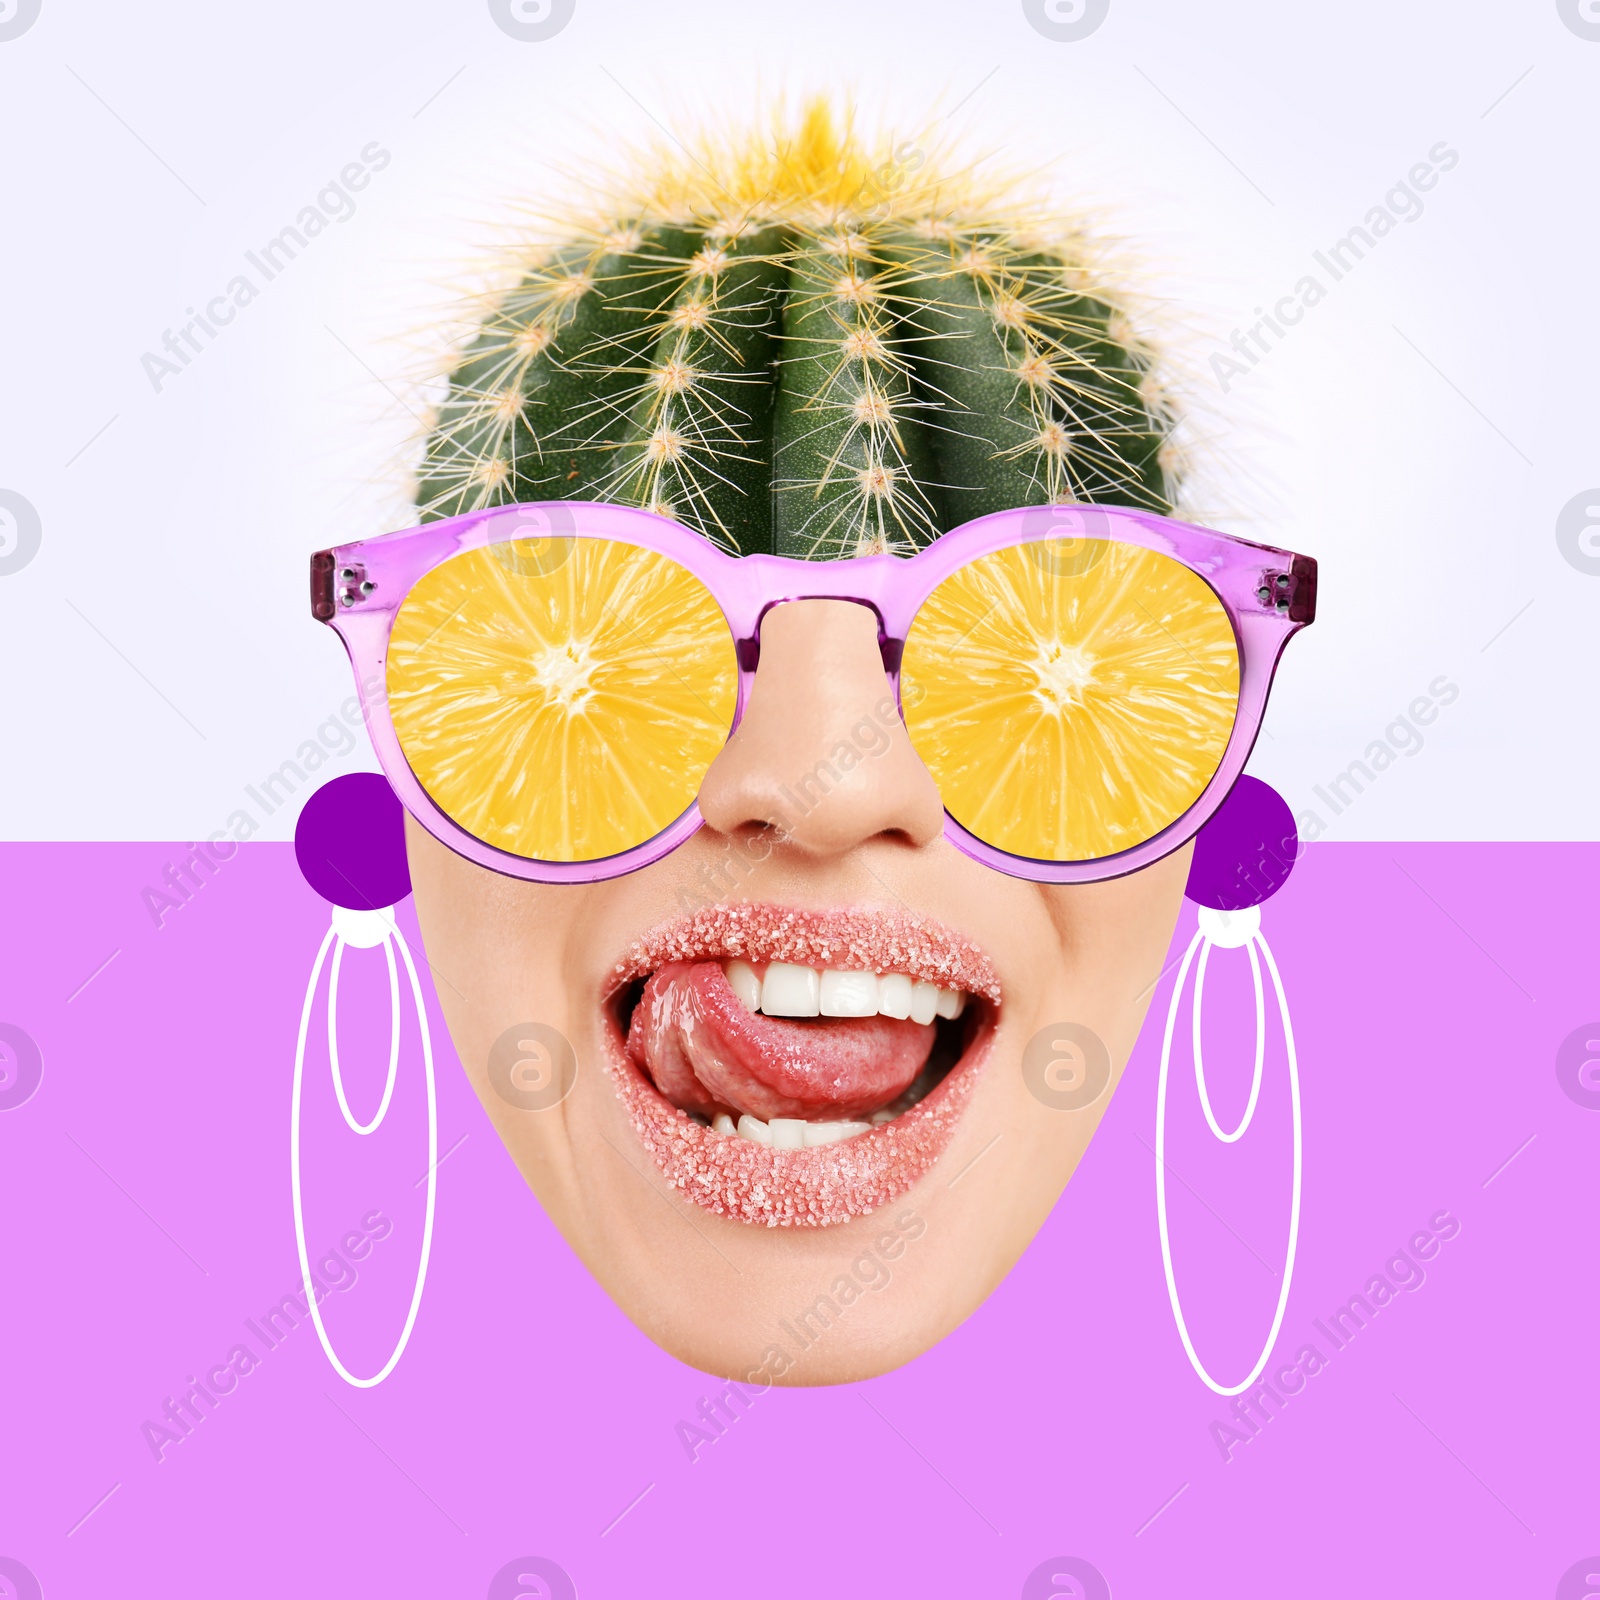 Image of Stylish art collage. Woman with cactus on top of head and lemon sunglasses on color background